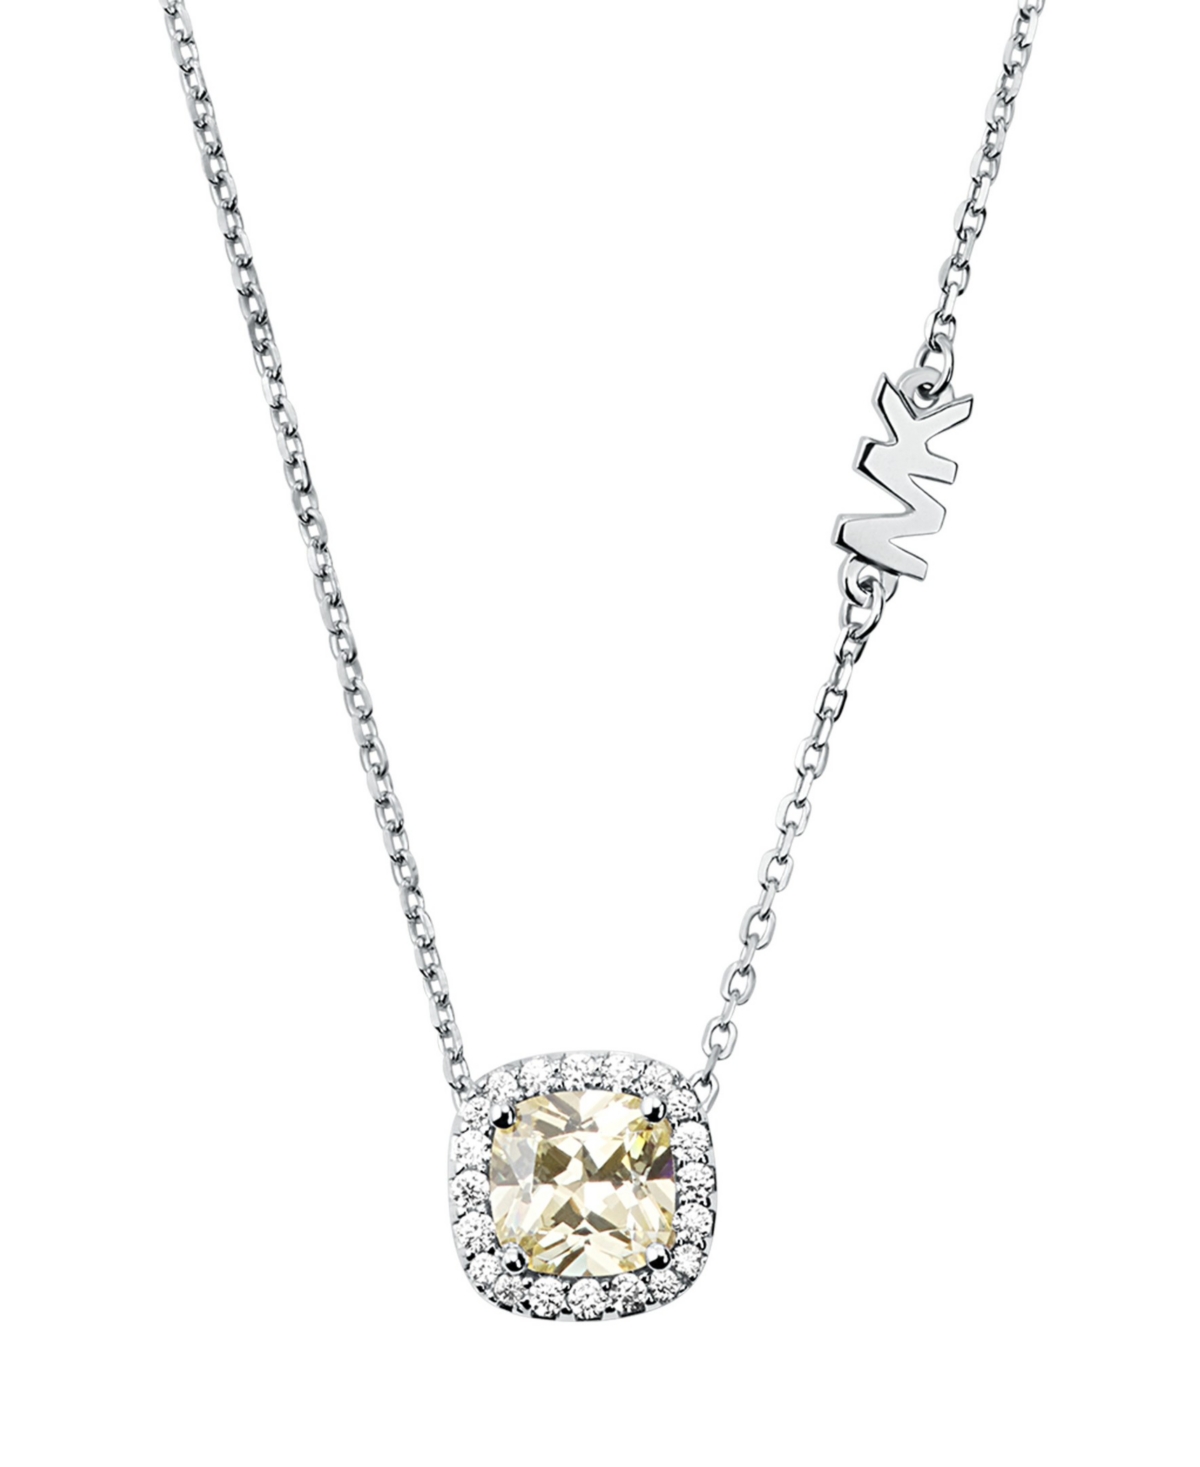 Michael Kors Women's Cushion Halo Pendant With Cubic Zirconia Clear Stones In Silver Tone